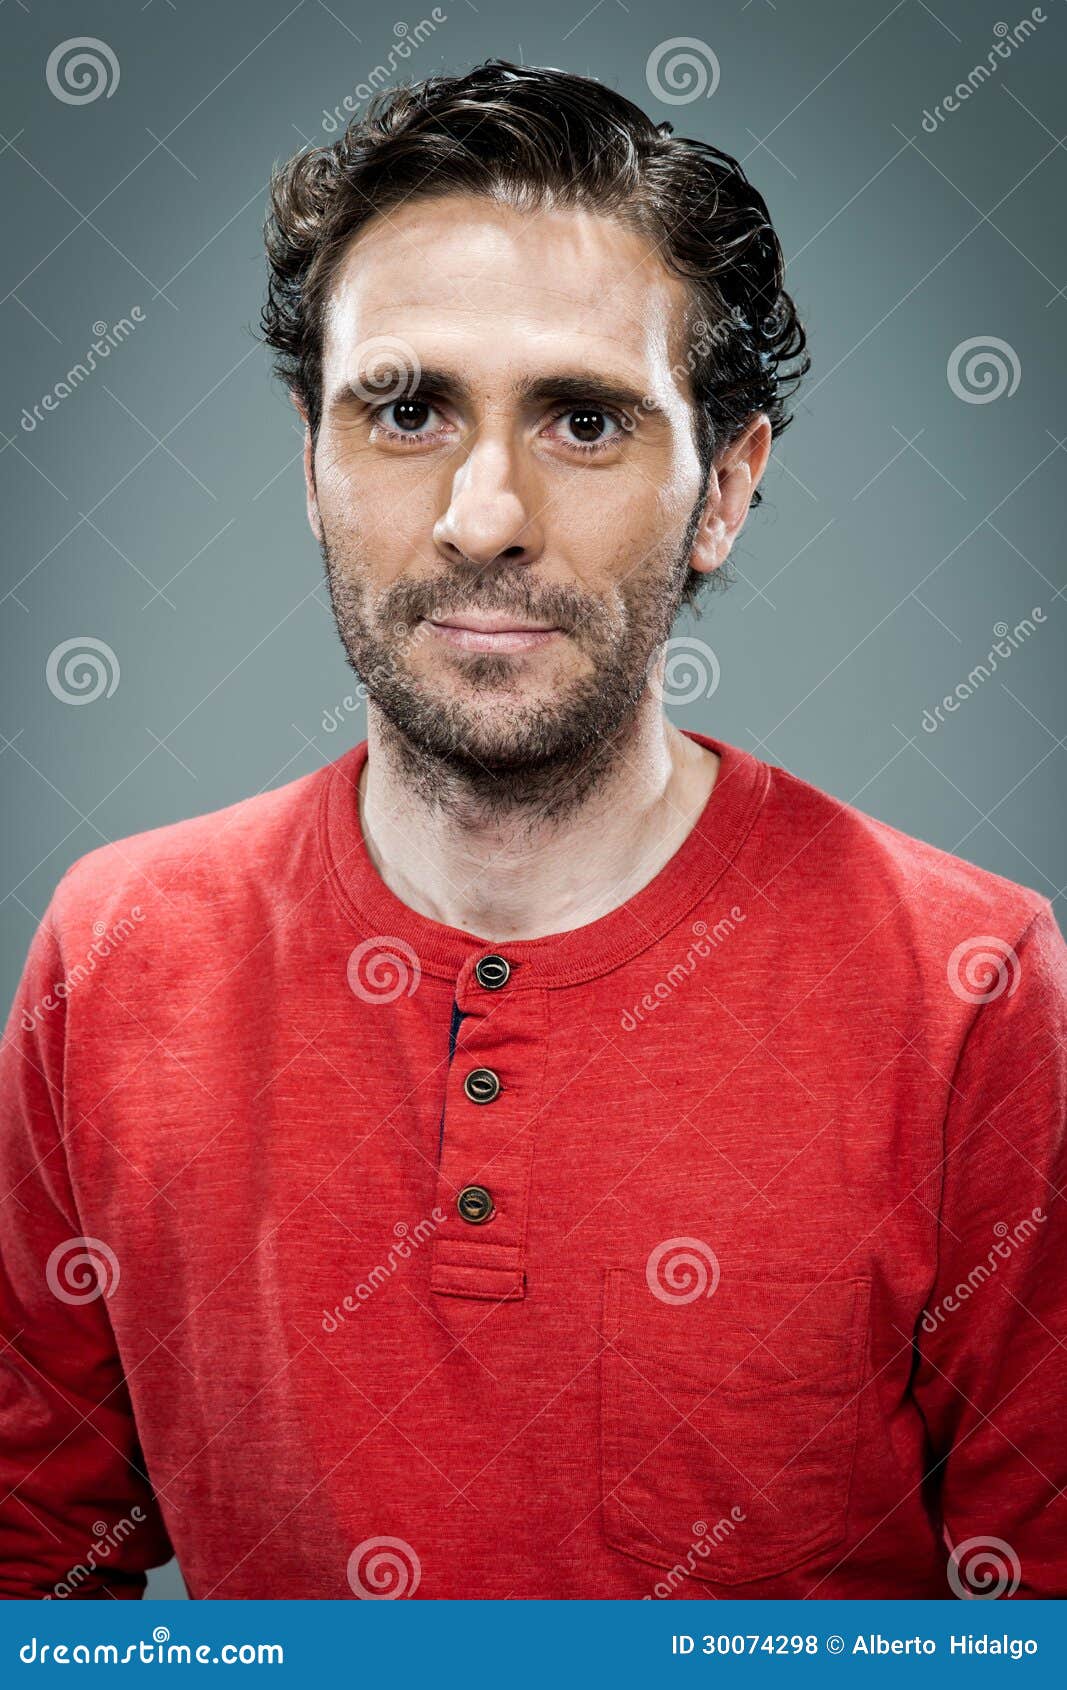 Young Man With Serious Expression Royalty Free Stock Photos - Image ...